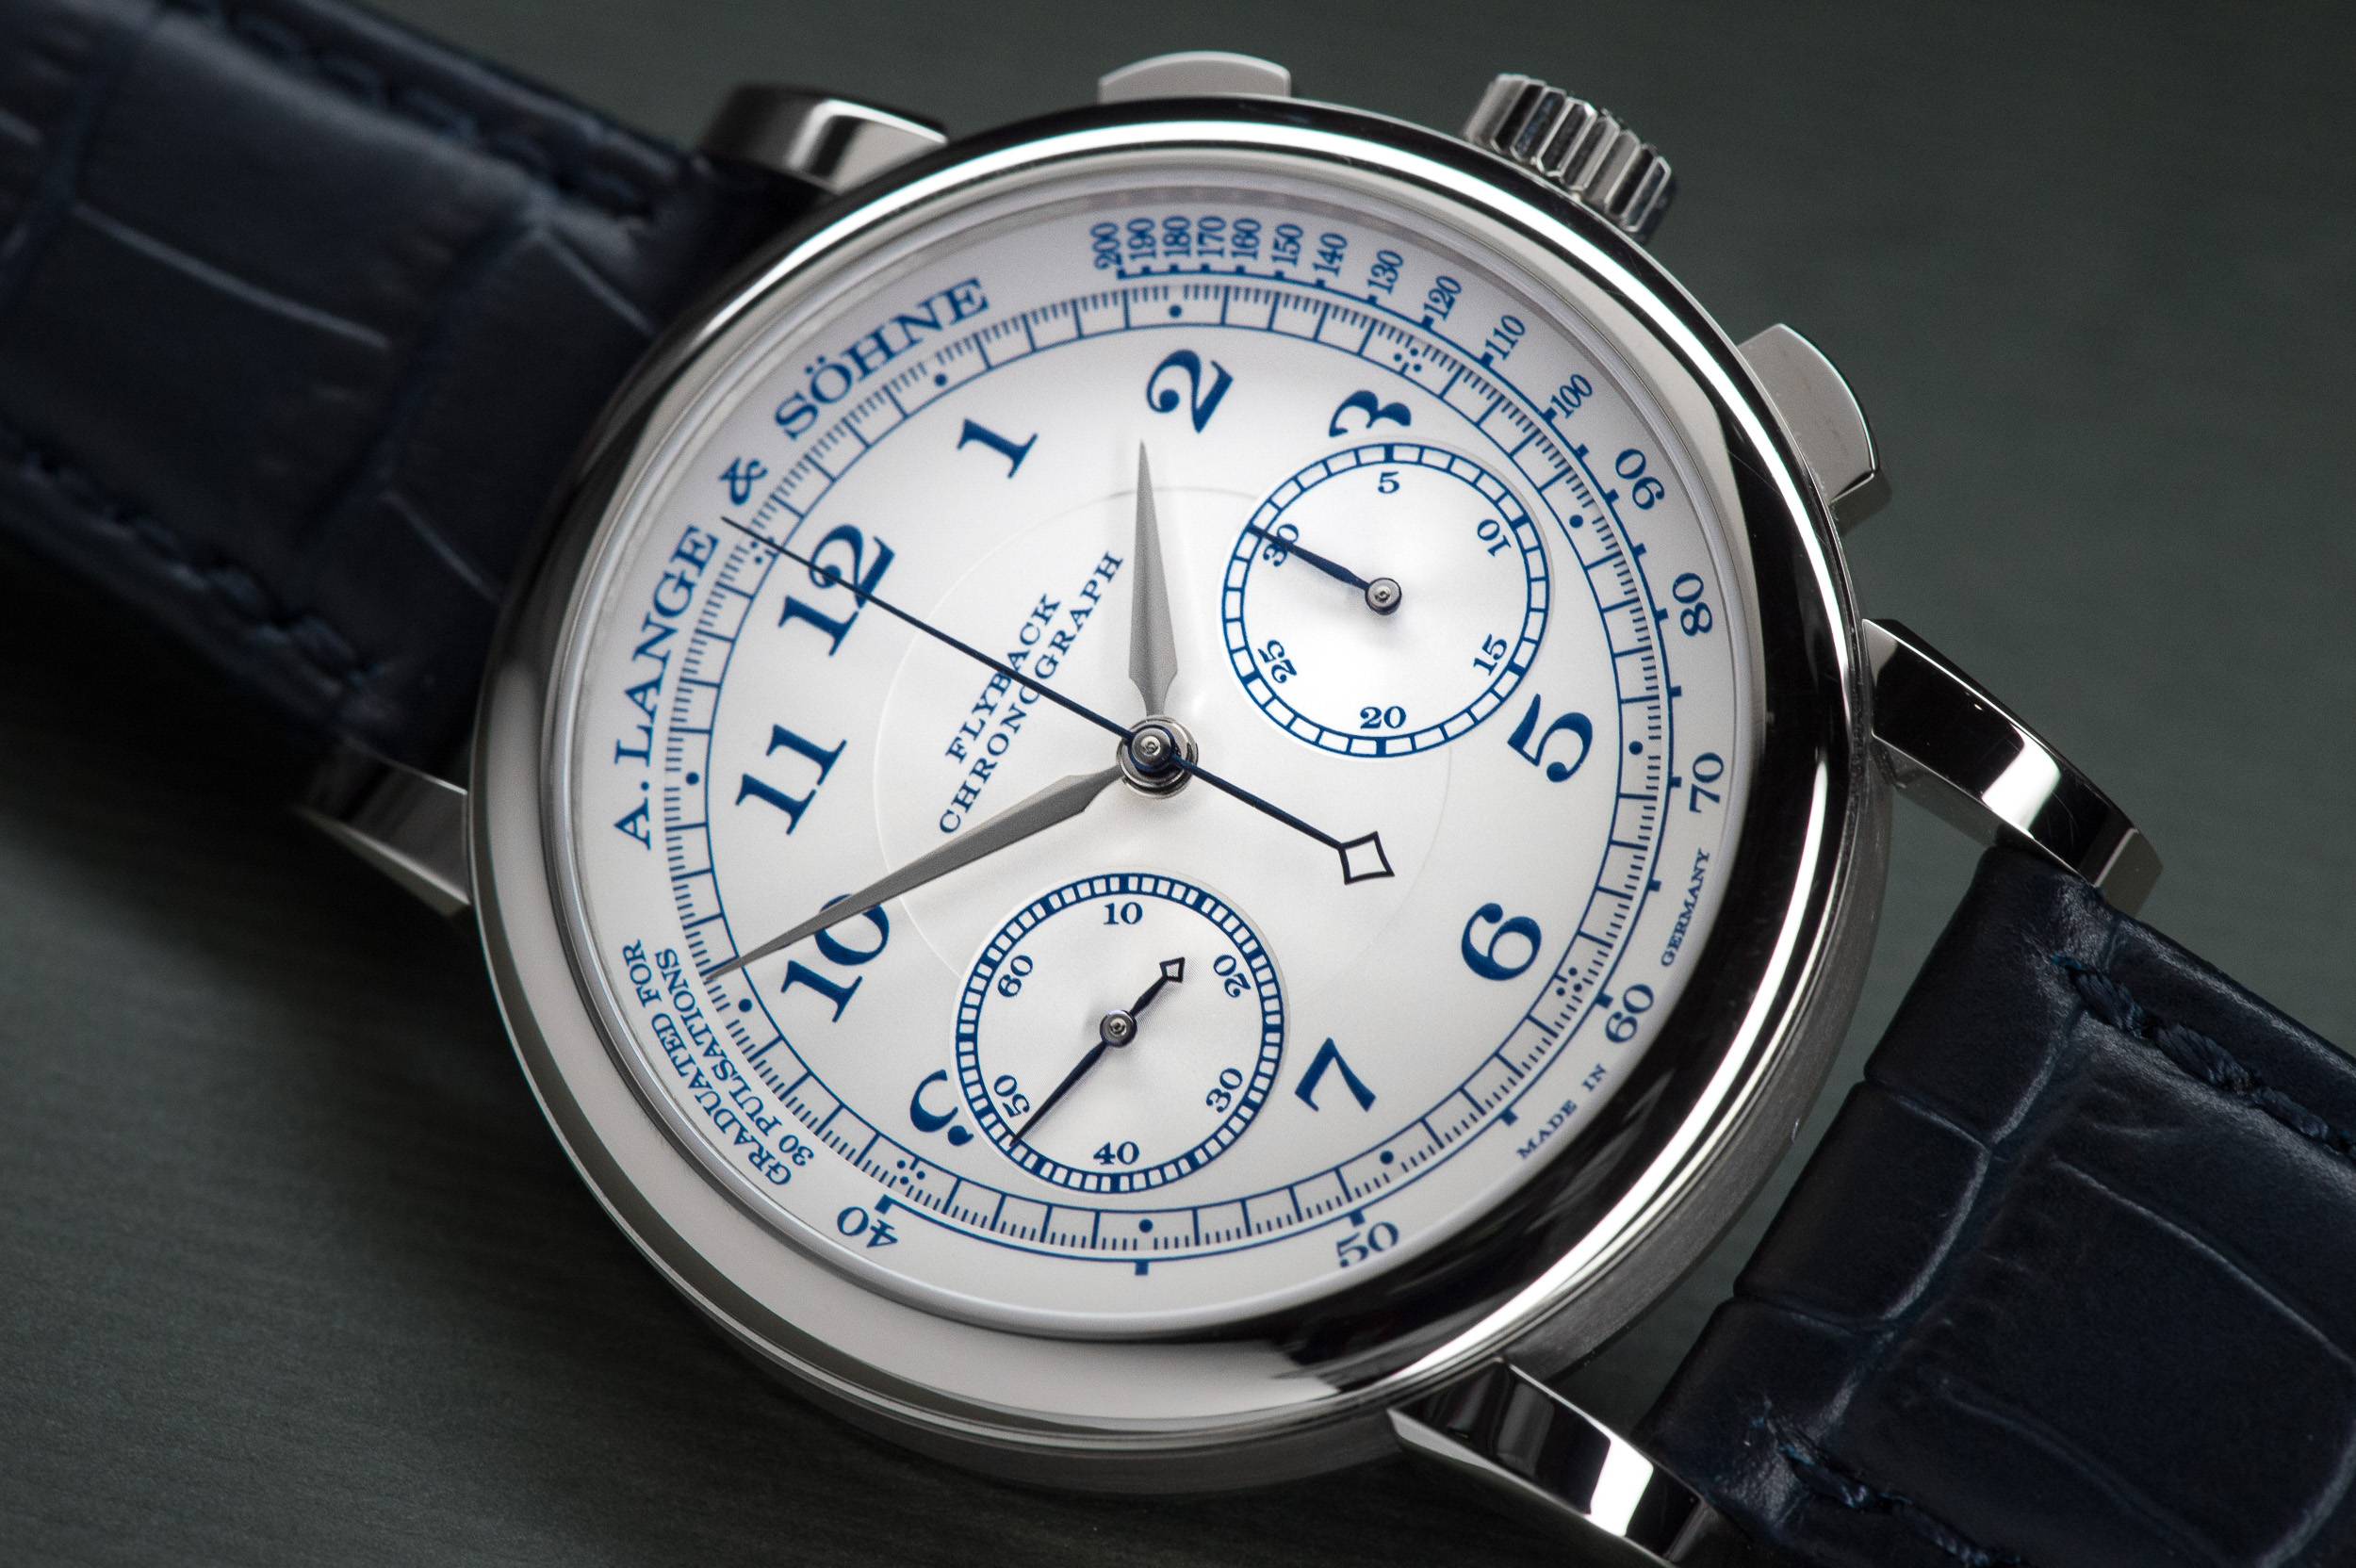 Hands On The A. Lange & Söhne 1815 Chronograph Boutique Edition